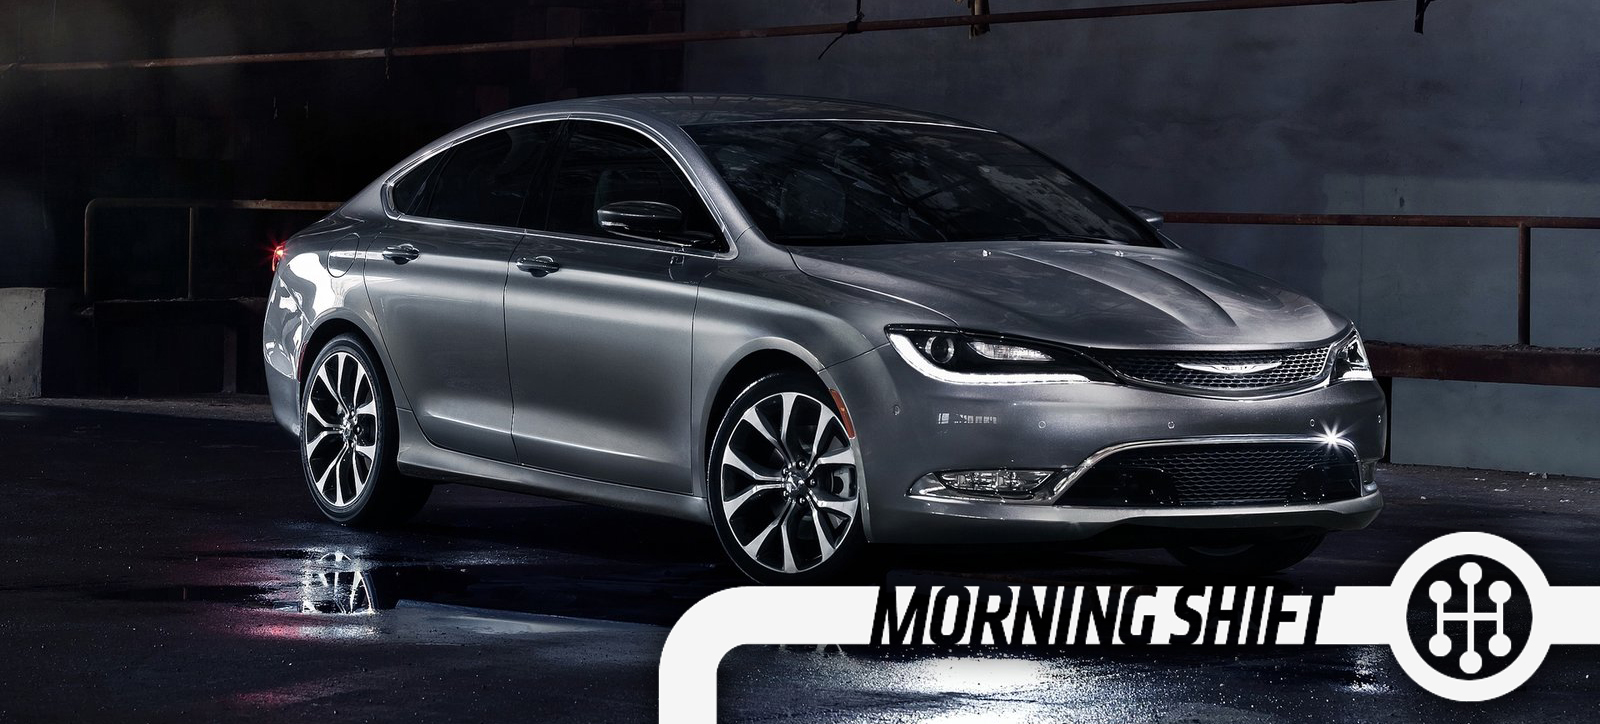 Why Fiat Chrysler Is Smart To Kill The Dodge Dart And Chrysler 200